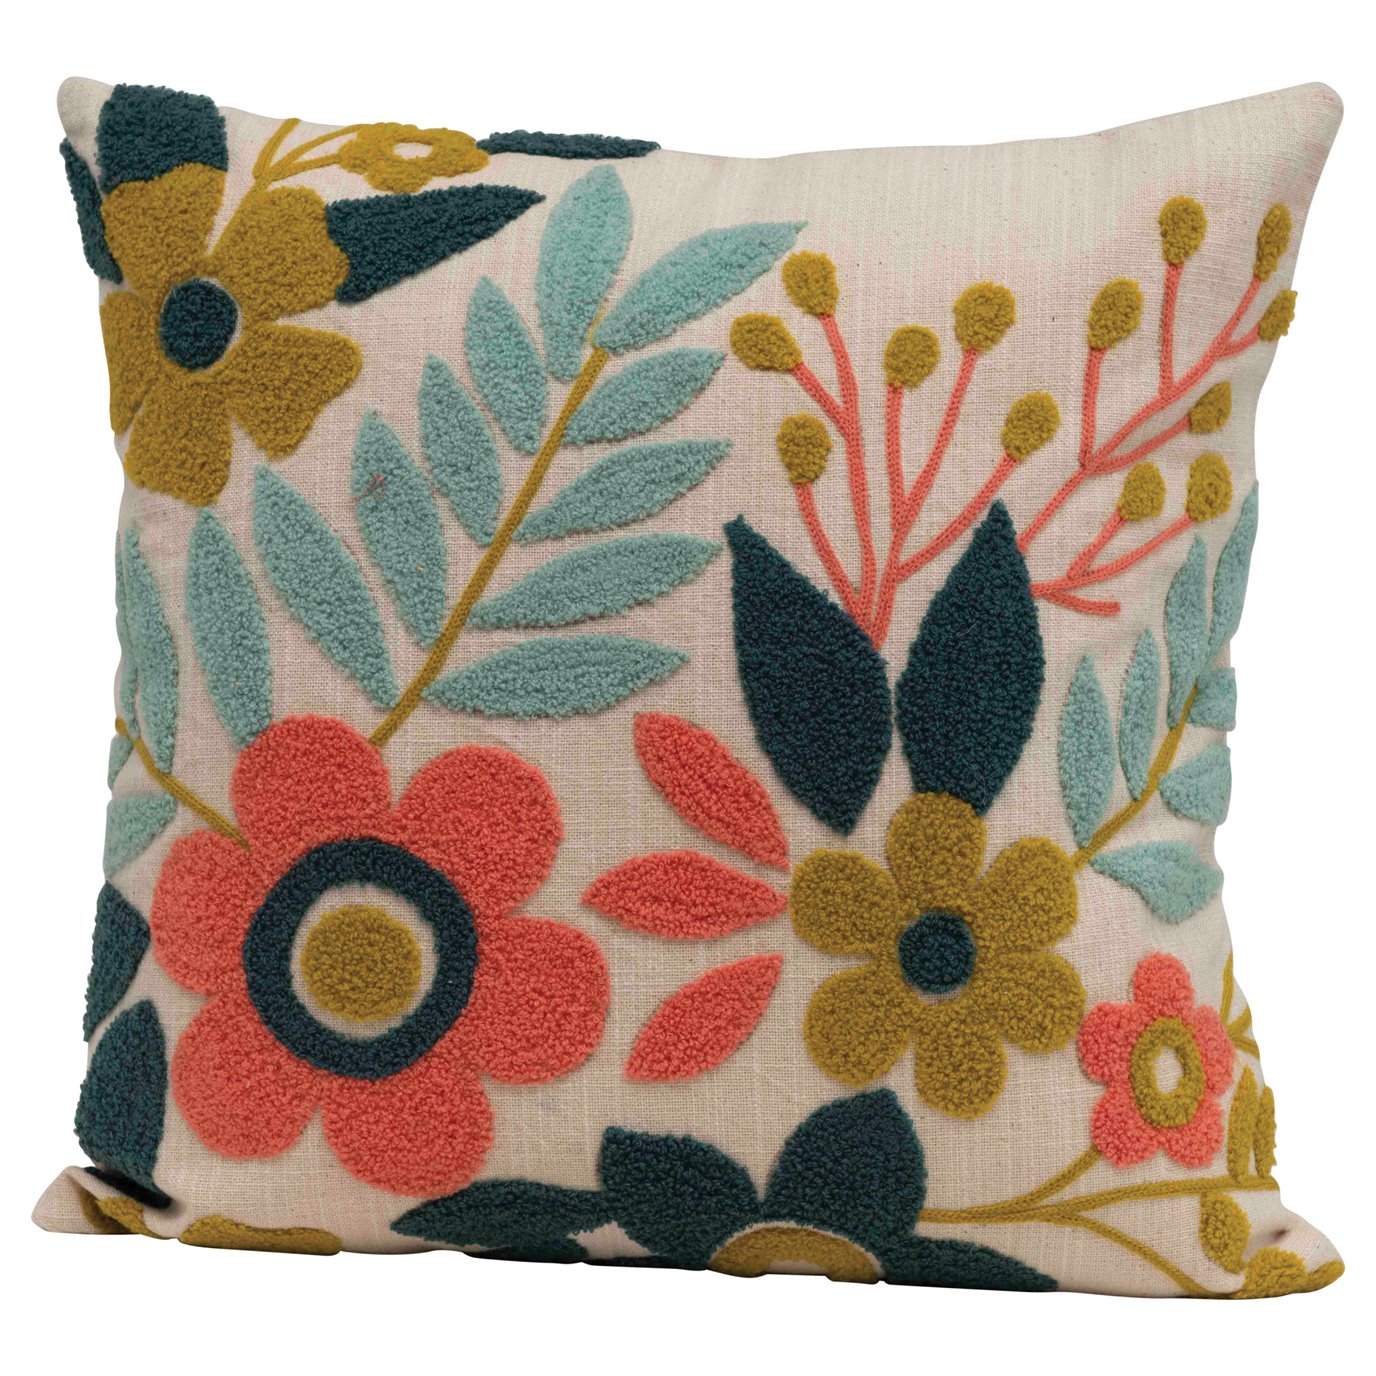 Square Floral Embroidered Cotton Pillow